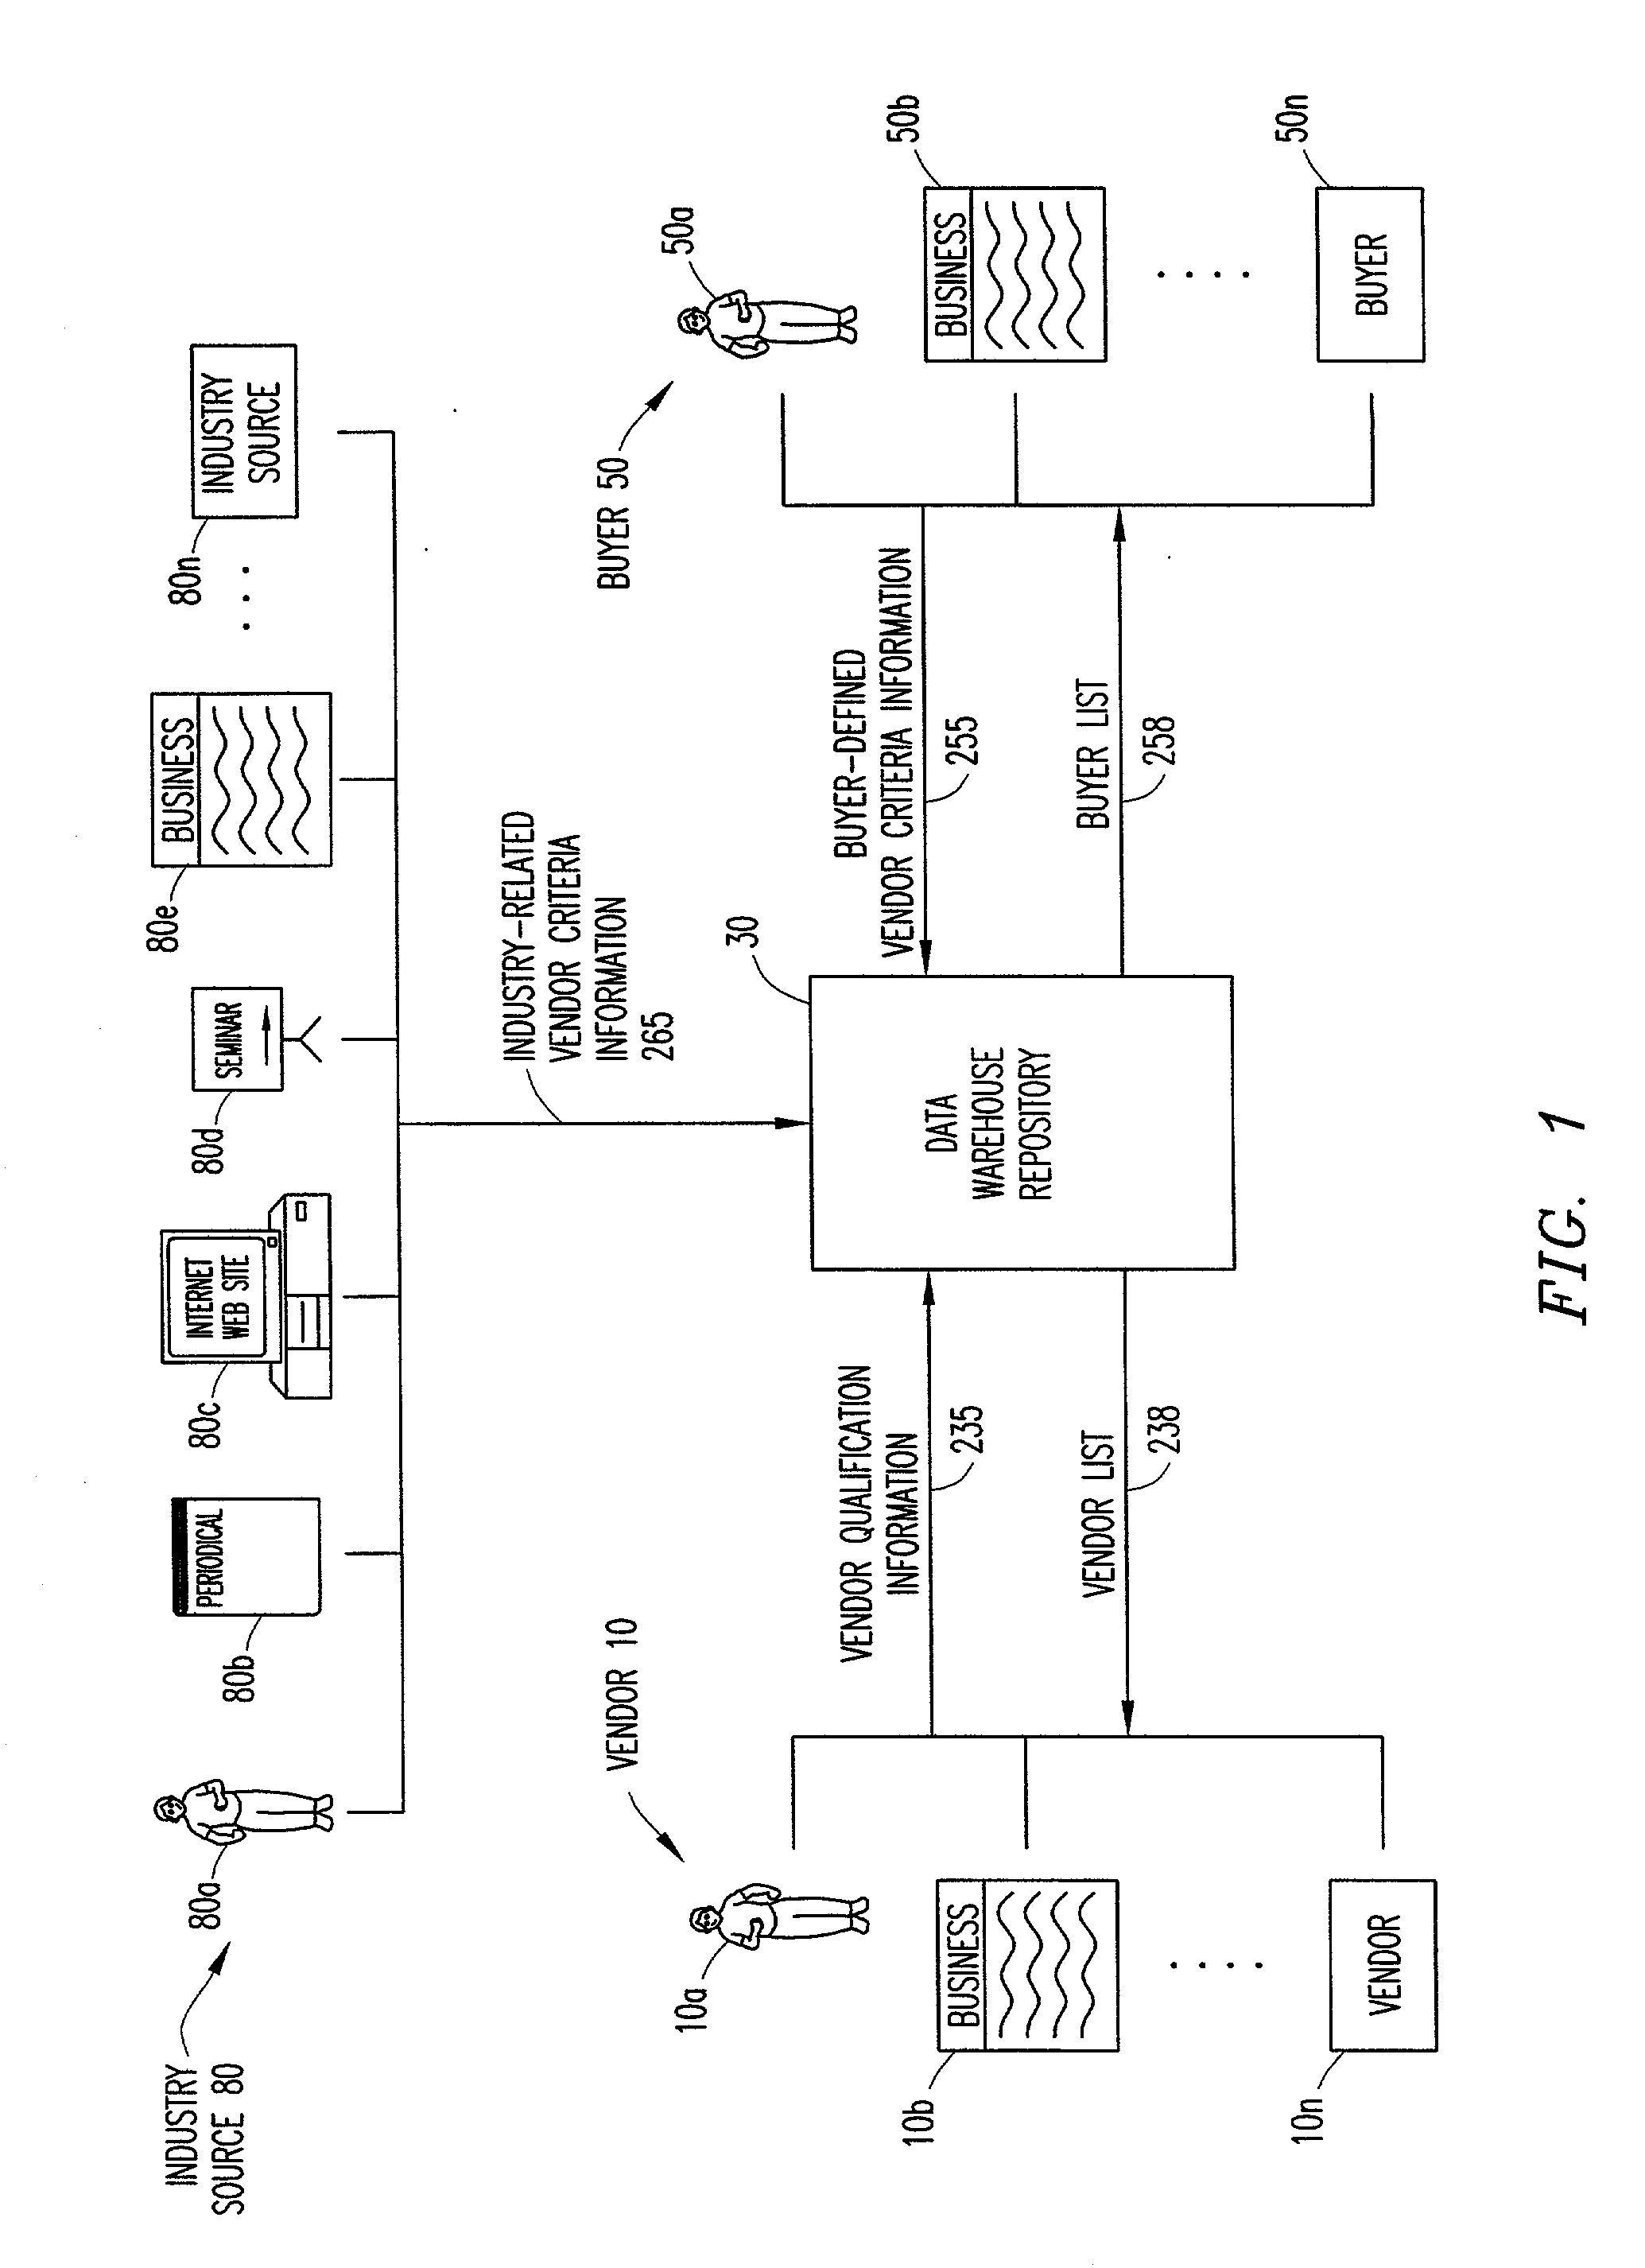 System and method for enabling and maintaining vendor qualification